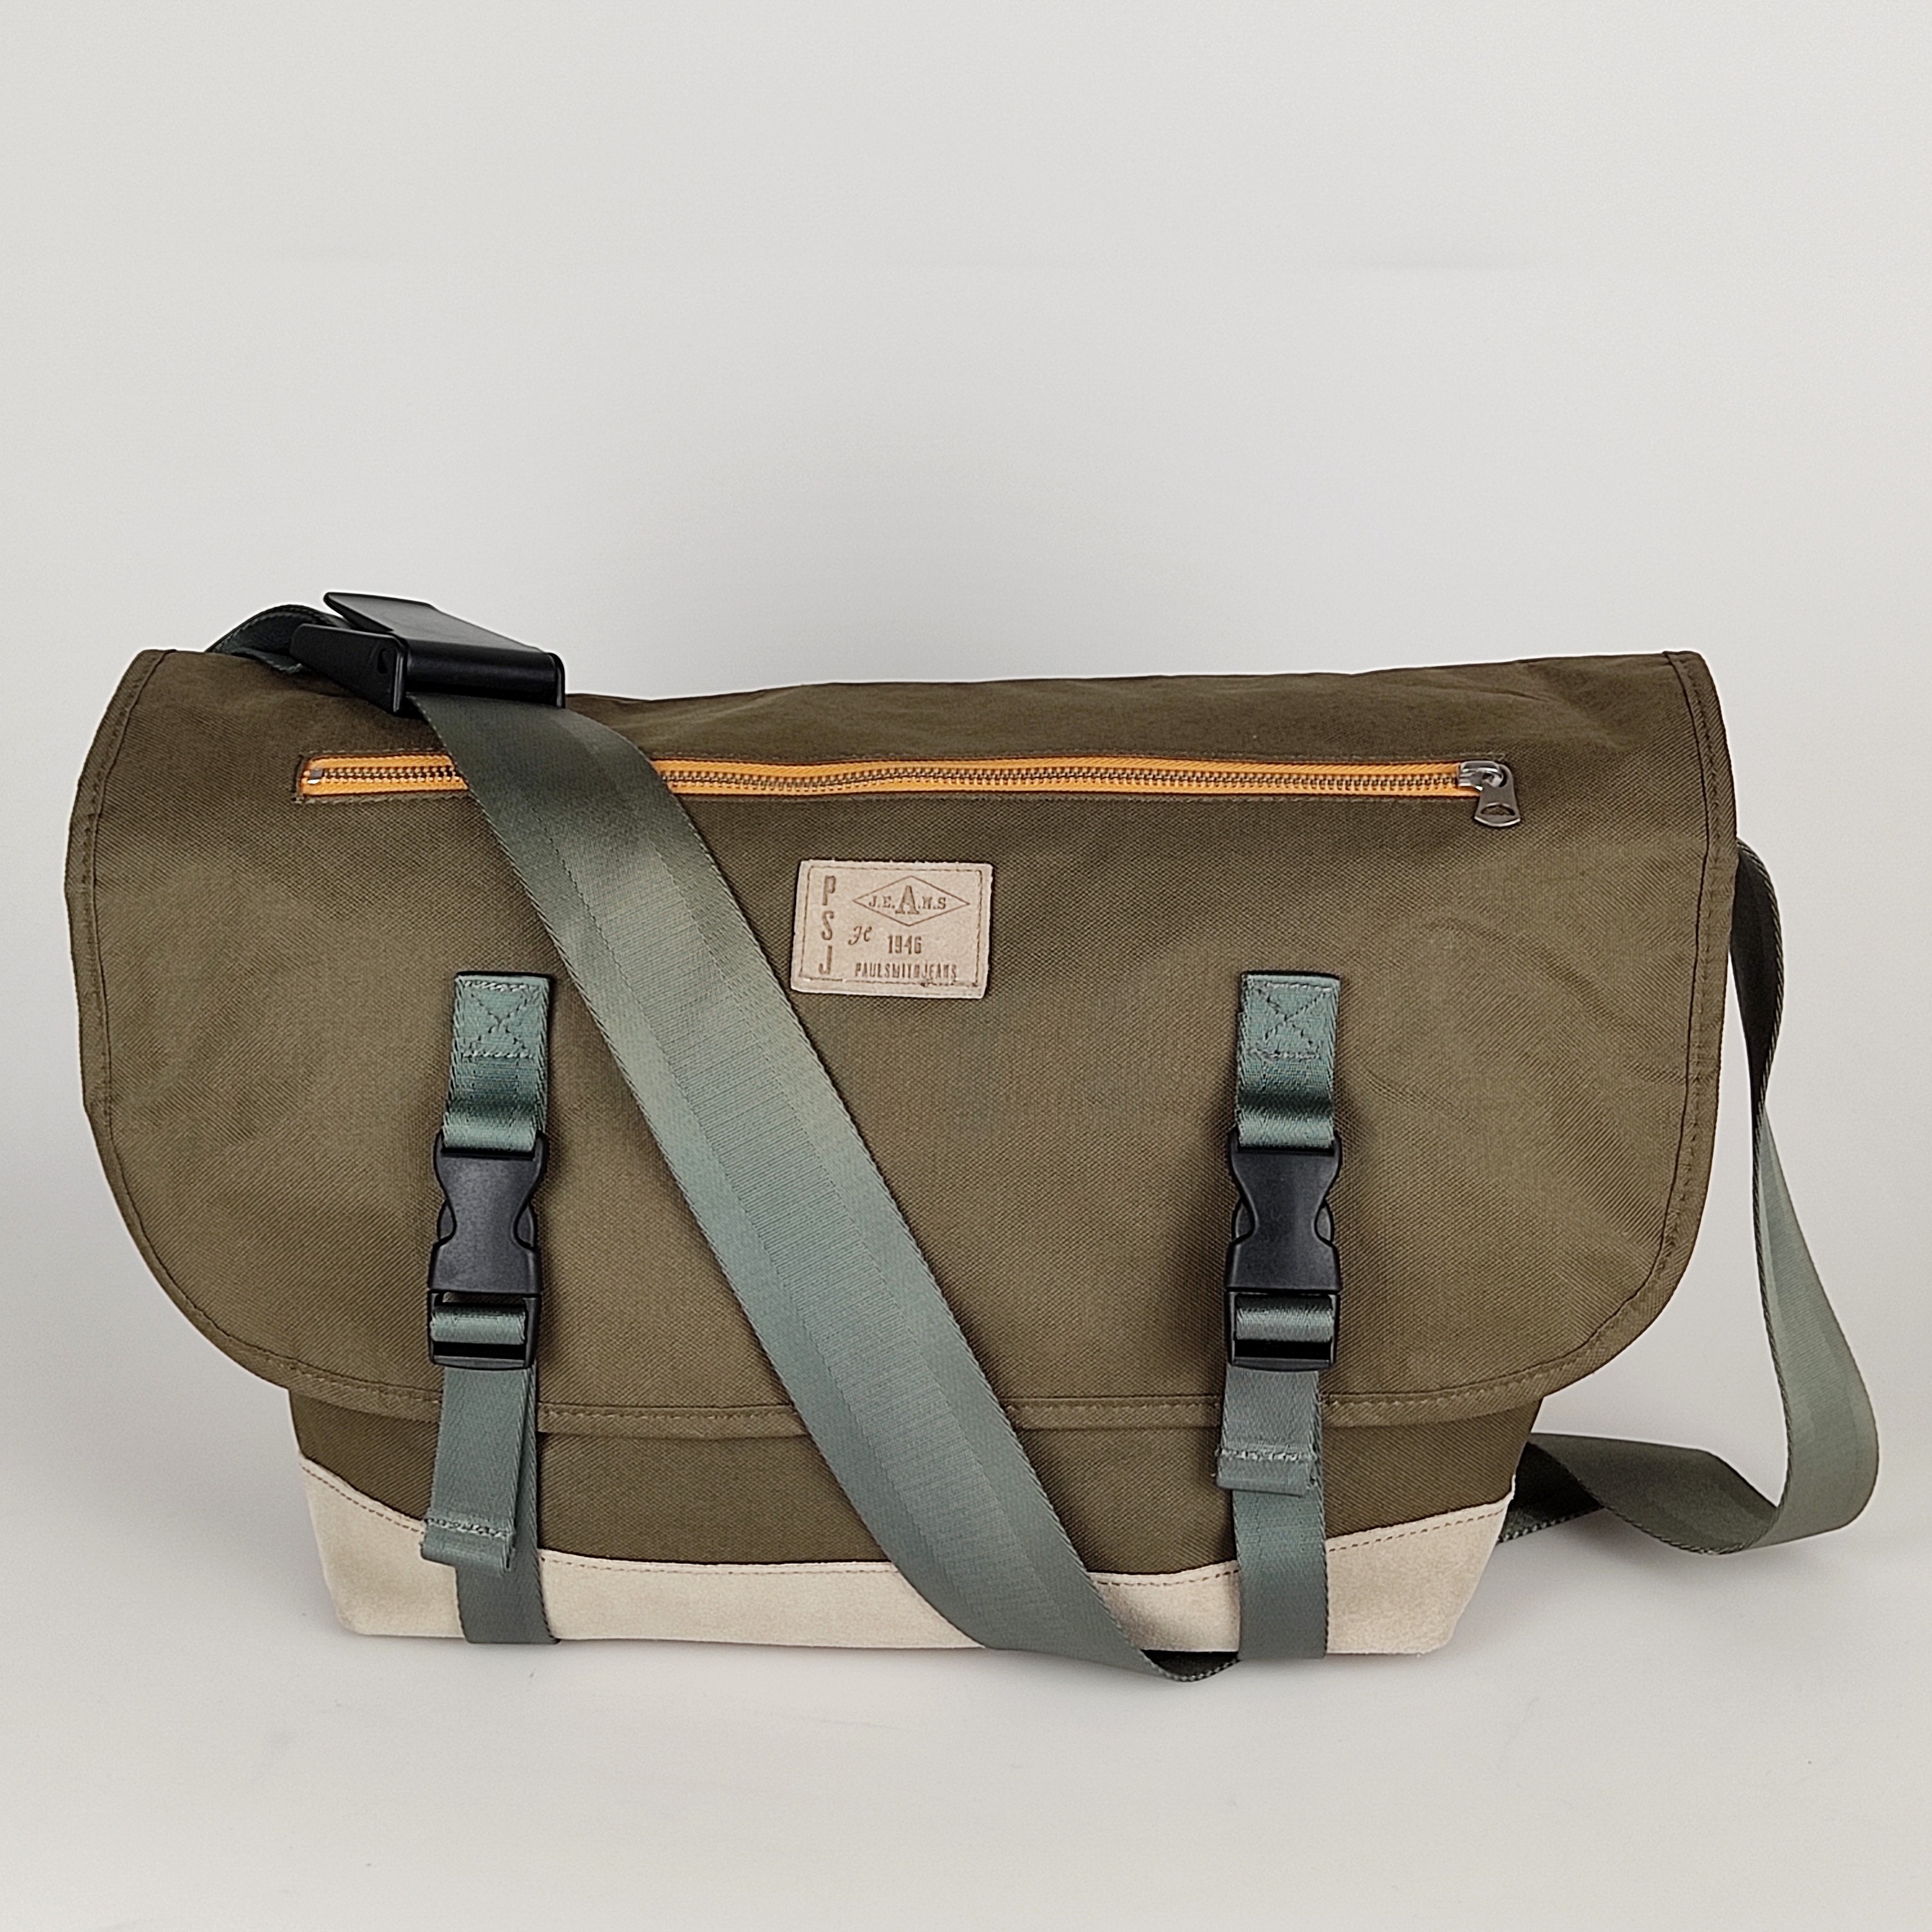 Paul smith large travel bag with shoulder strap - Catawiki